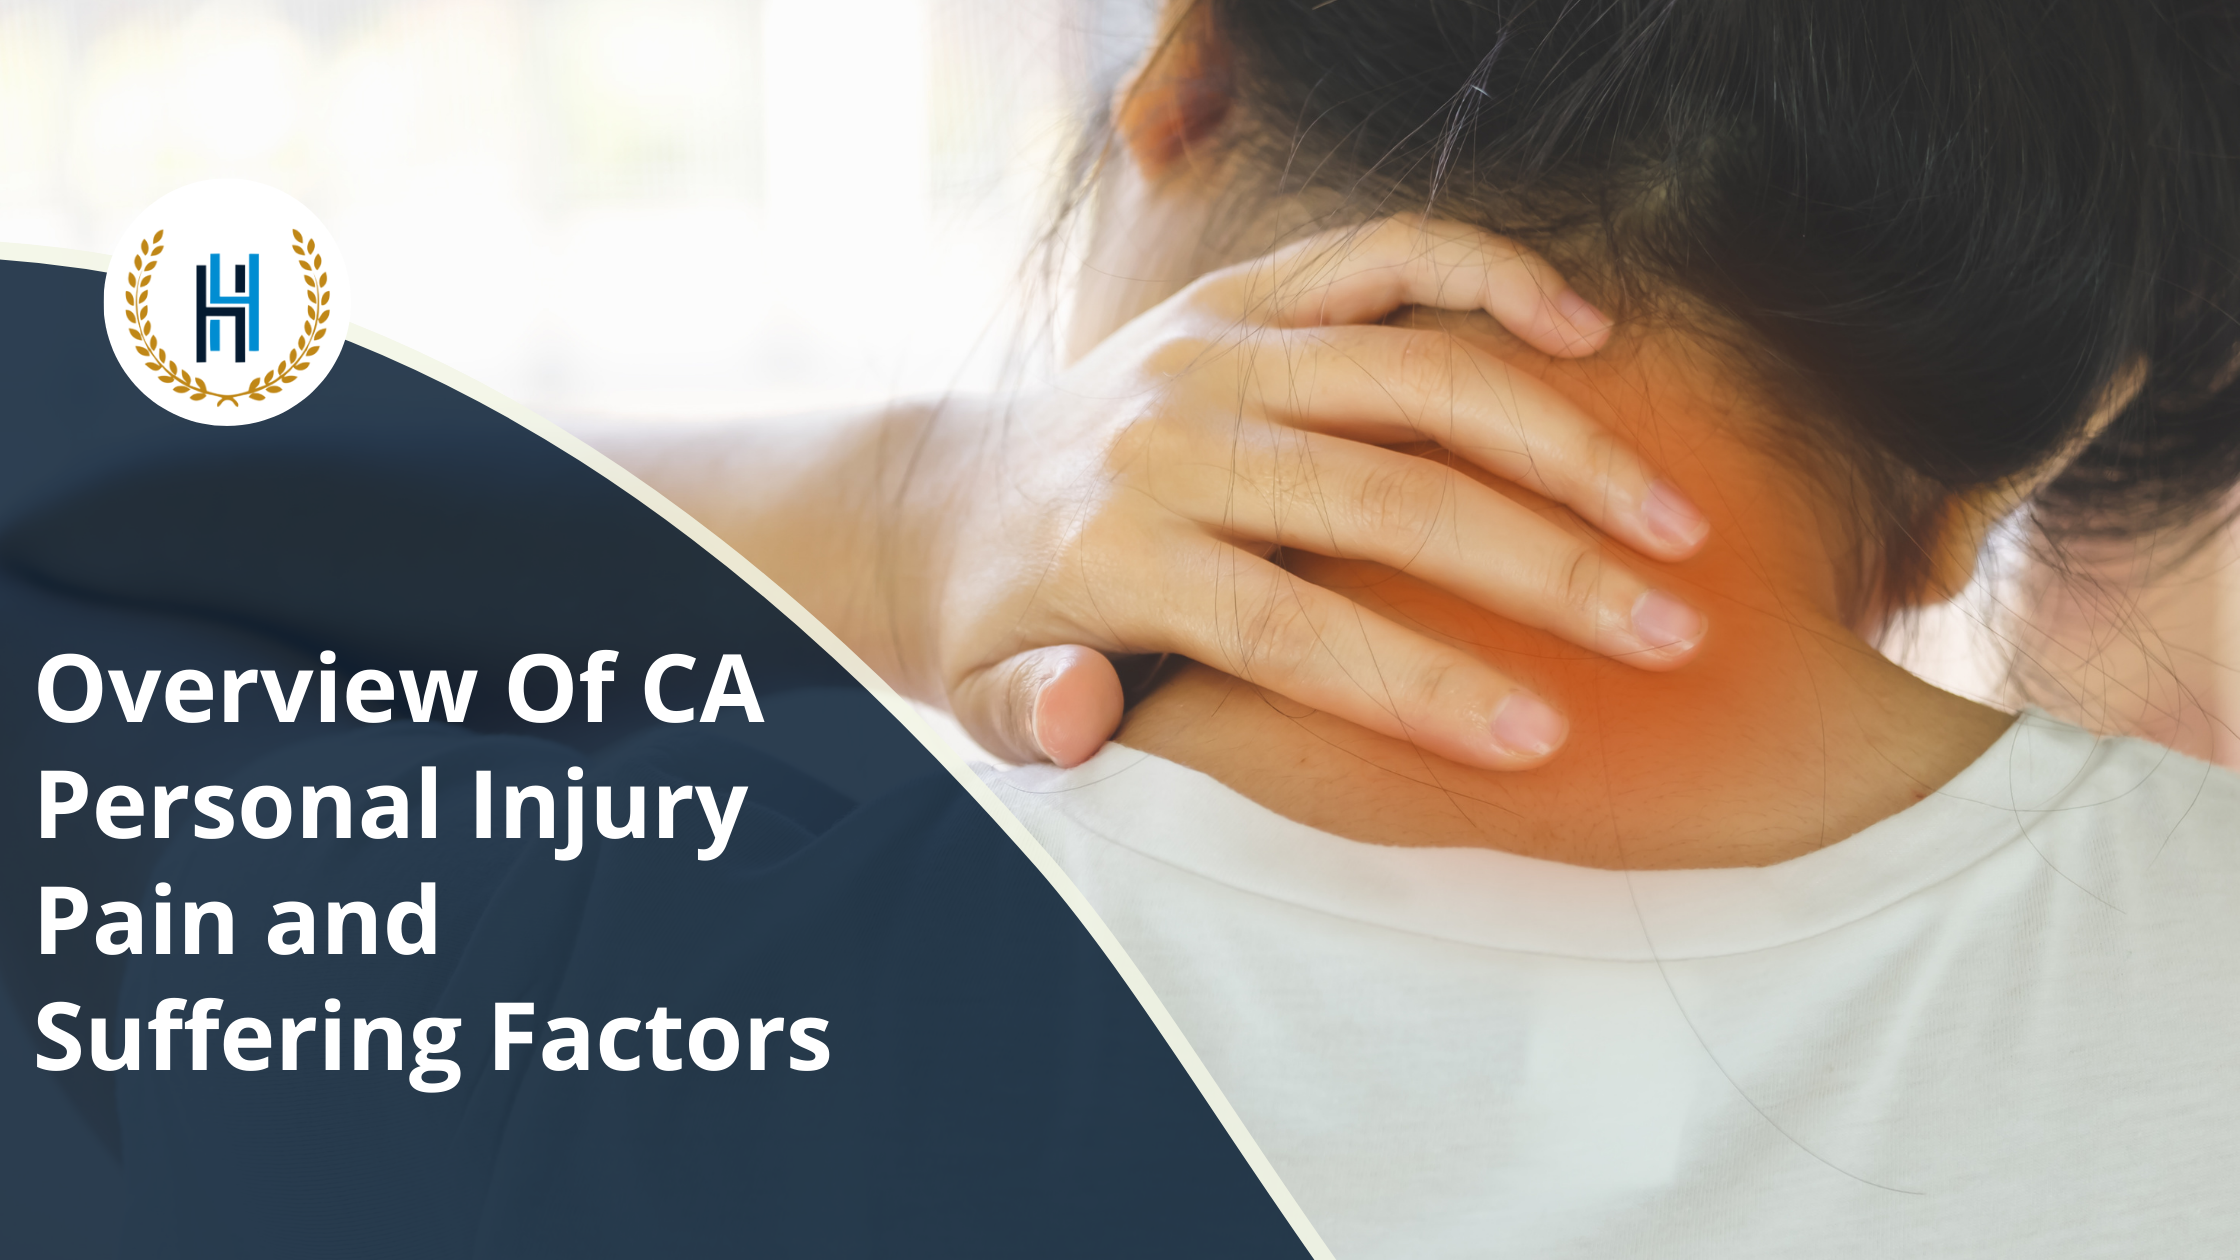 Overview Of CA Personal Injury Pain and Suffering Factors | 2H Law